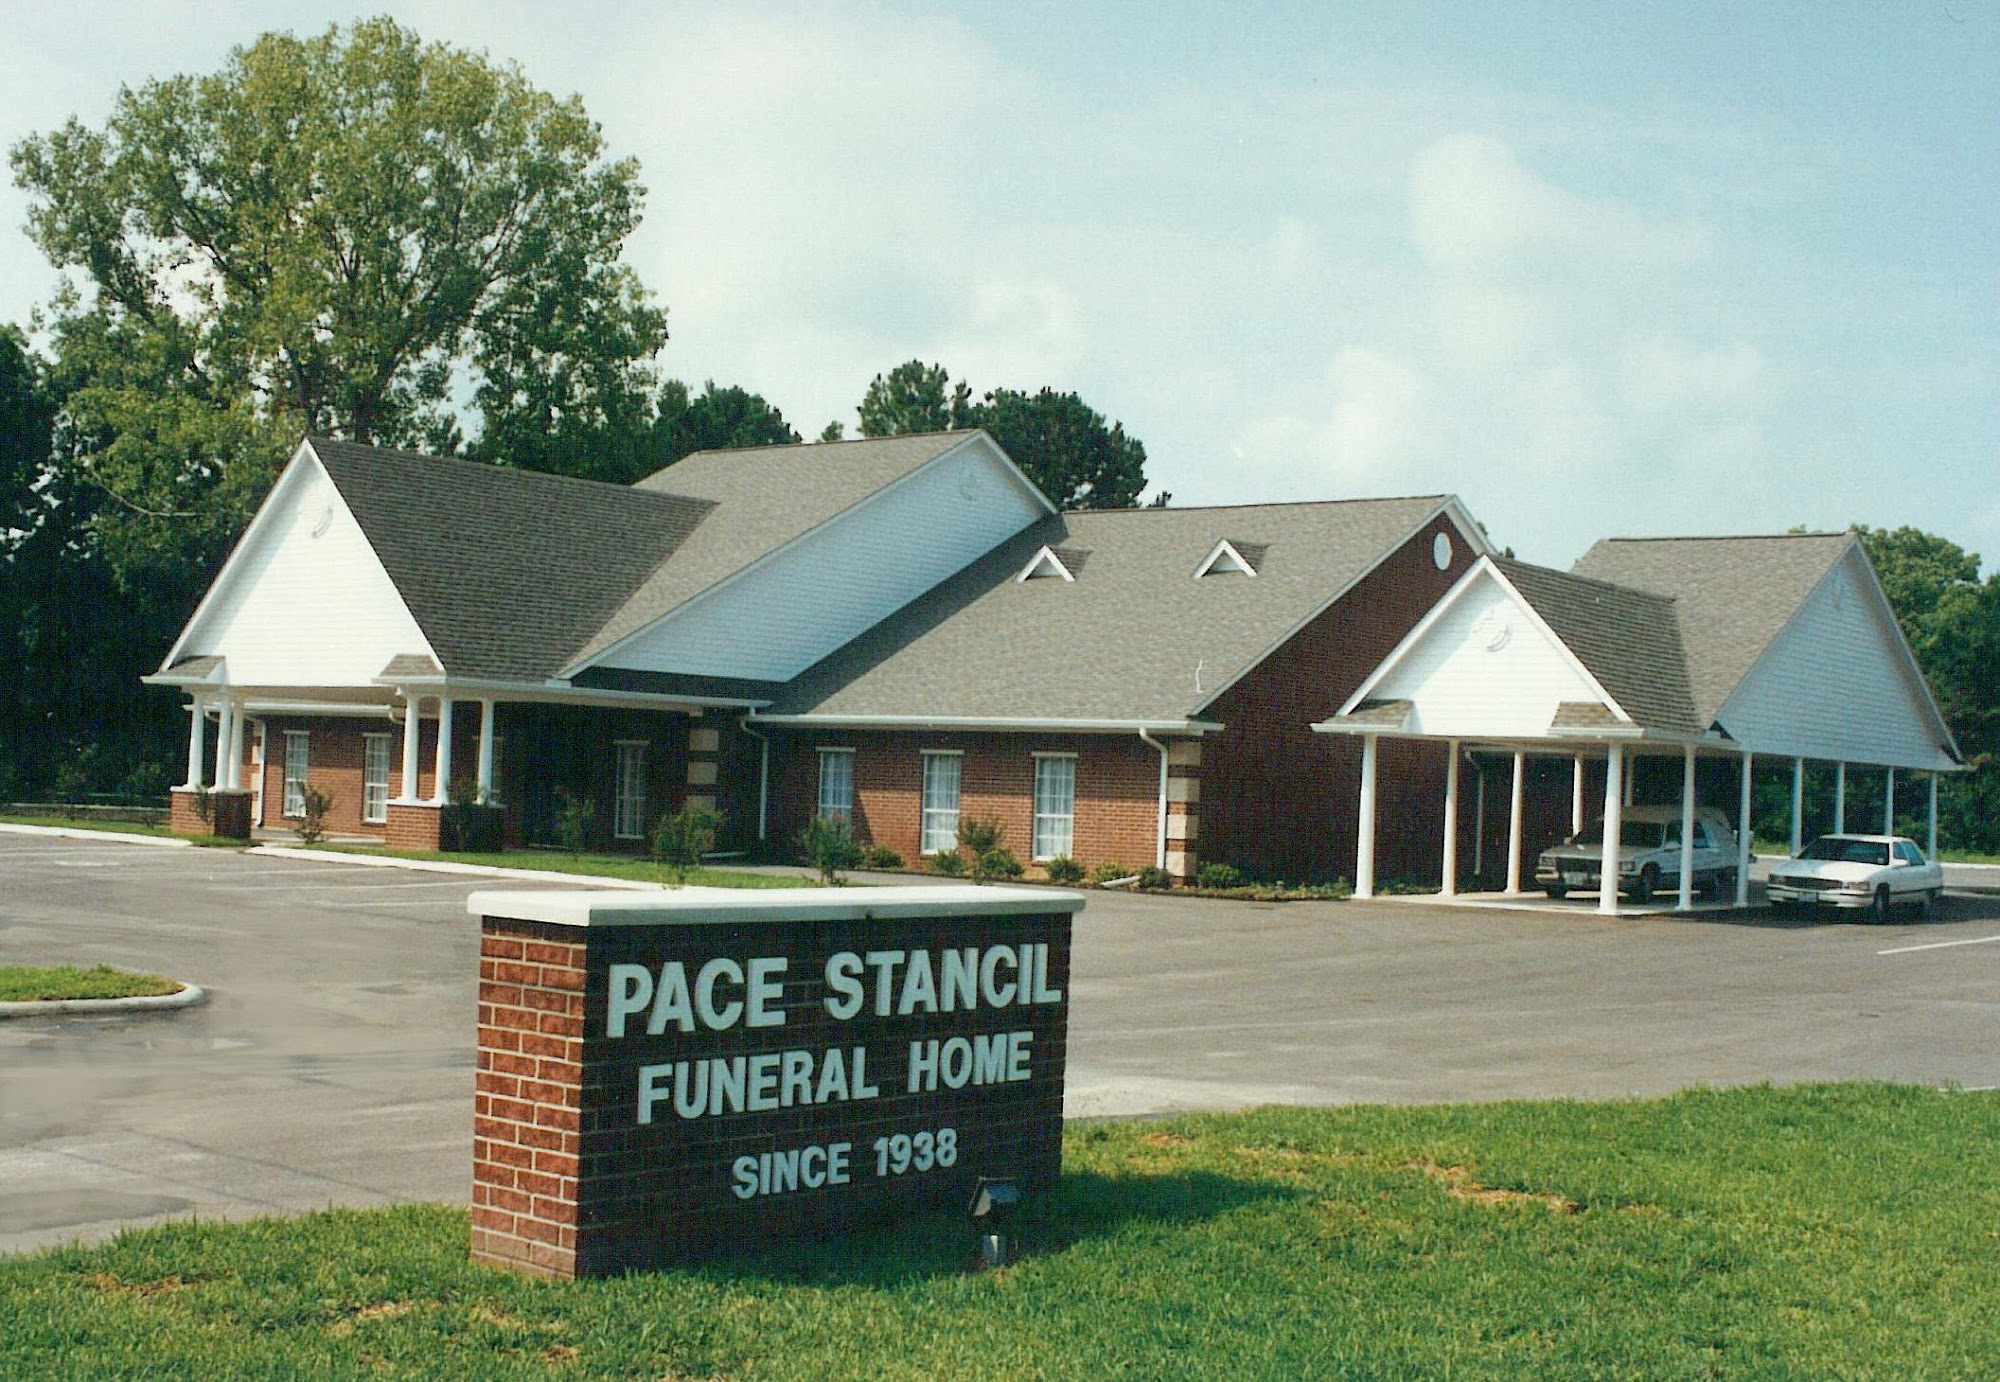 Pace-Stancil Funeral Home & Cemetery 1304 N Cleveland St, Dayton Texas 77535